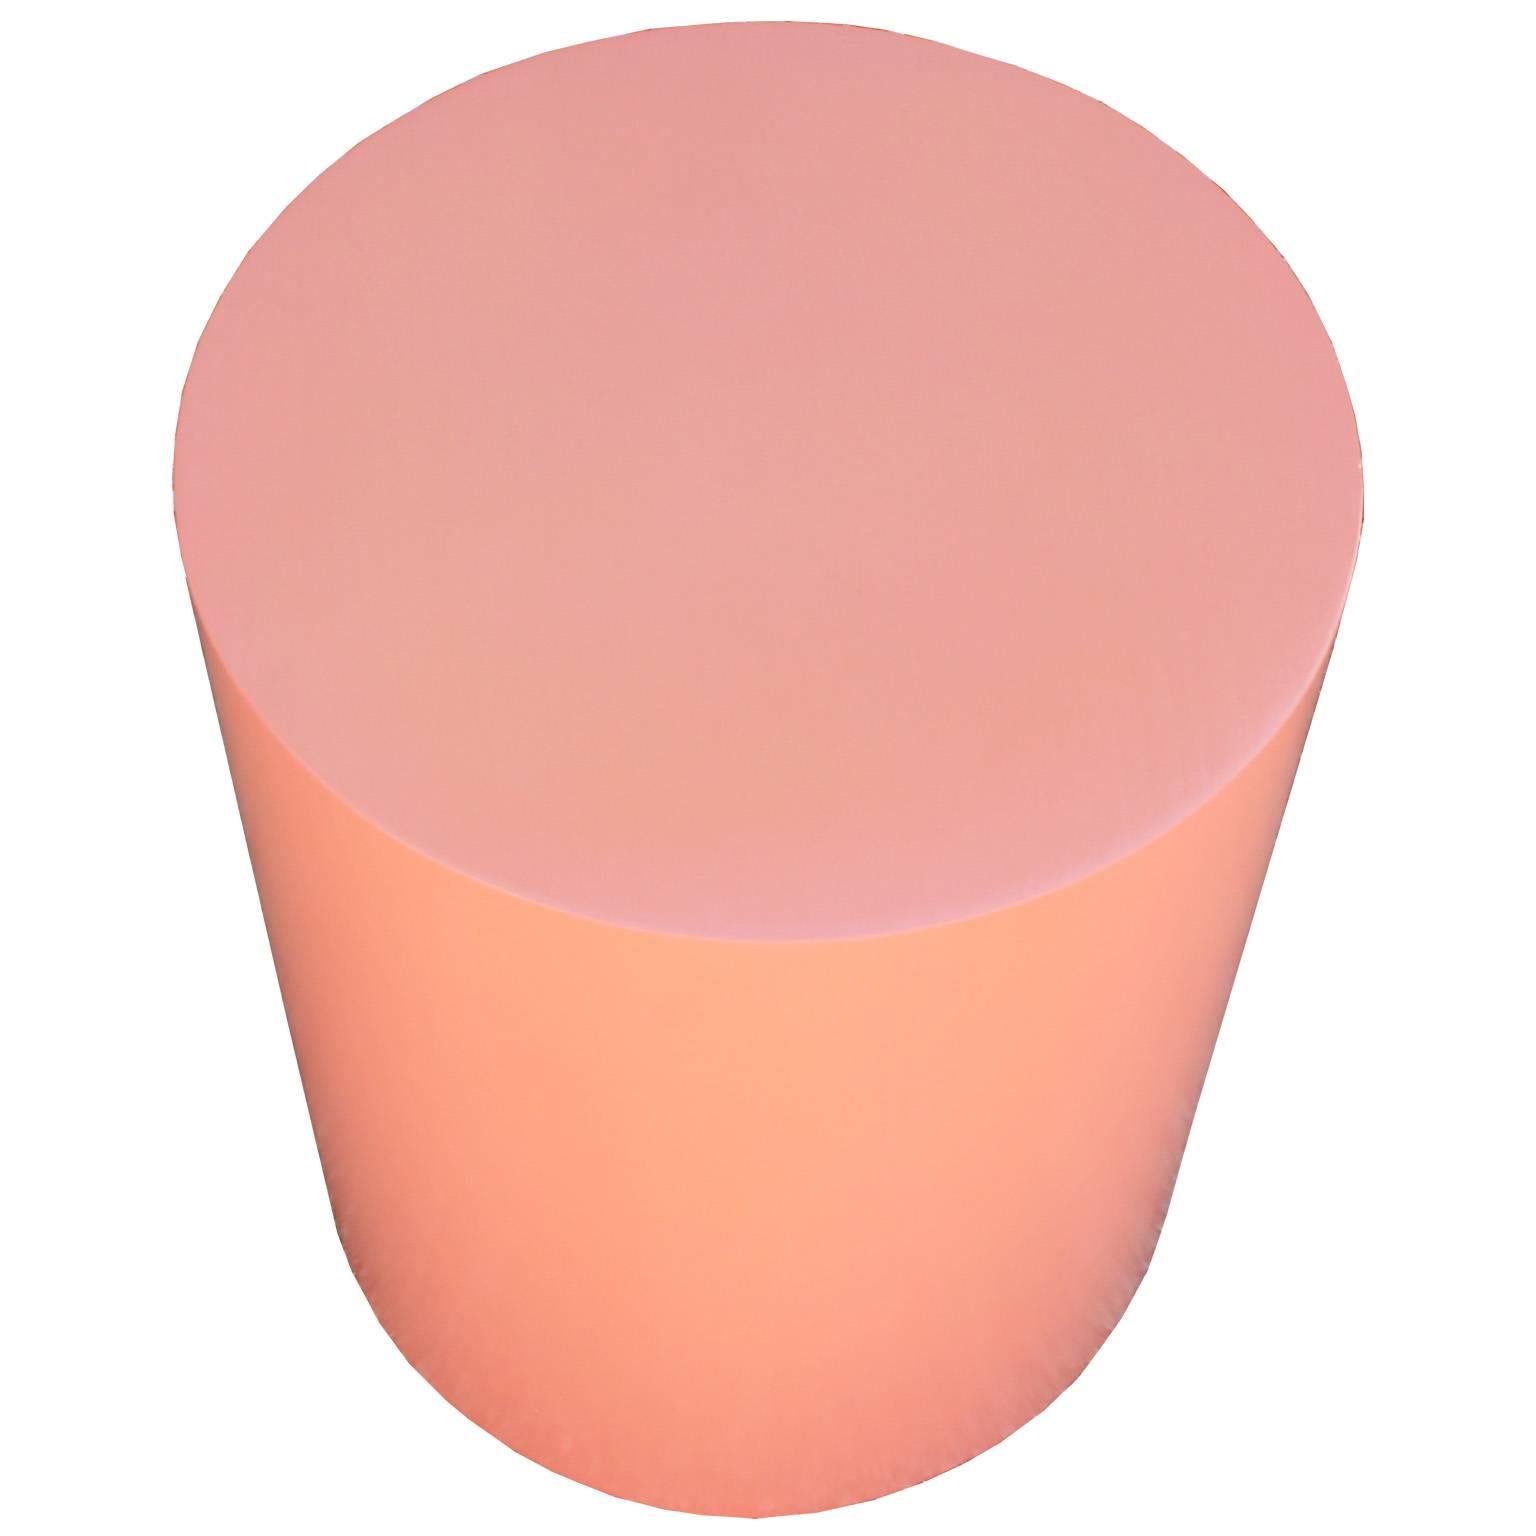 Eye catching cylinder shaped side or accent table. Table is freshly finished in an unbelievably smooth coral pink lacquer. Table adds the perfect pop of color to any space. Would looks perfect in a modern or Mid-Century interior.